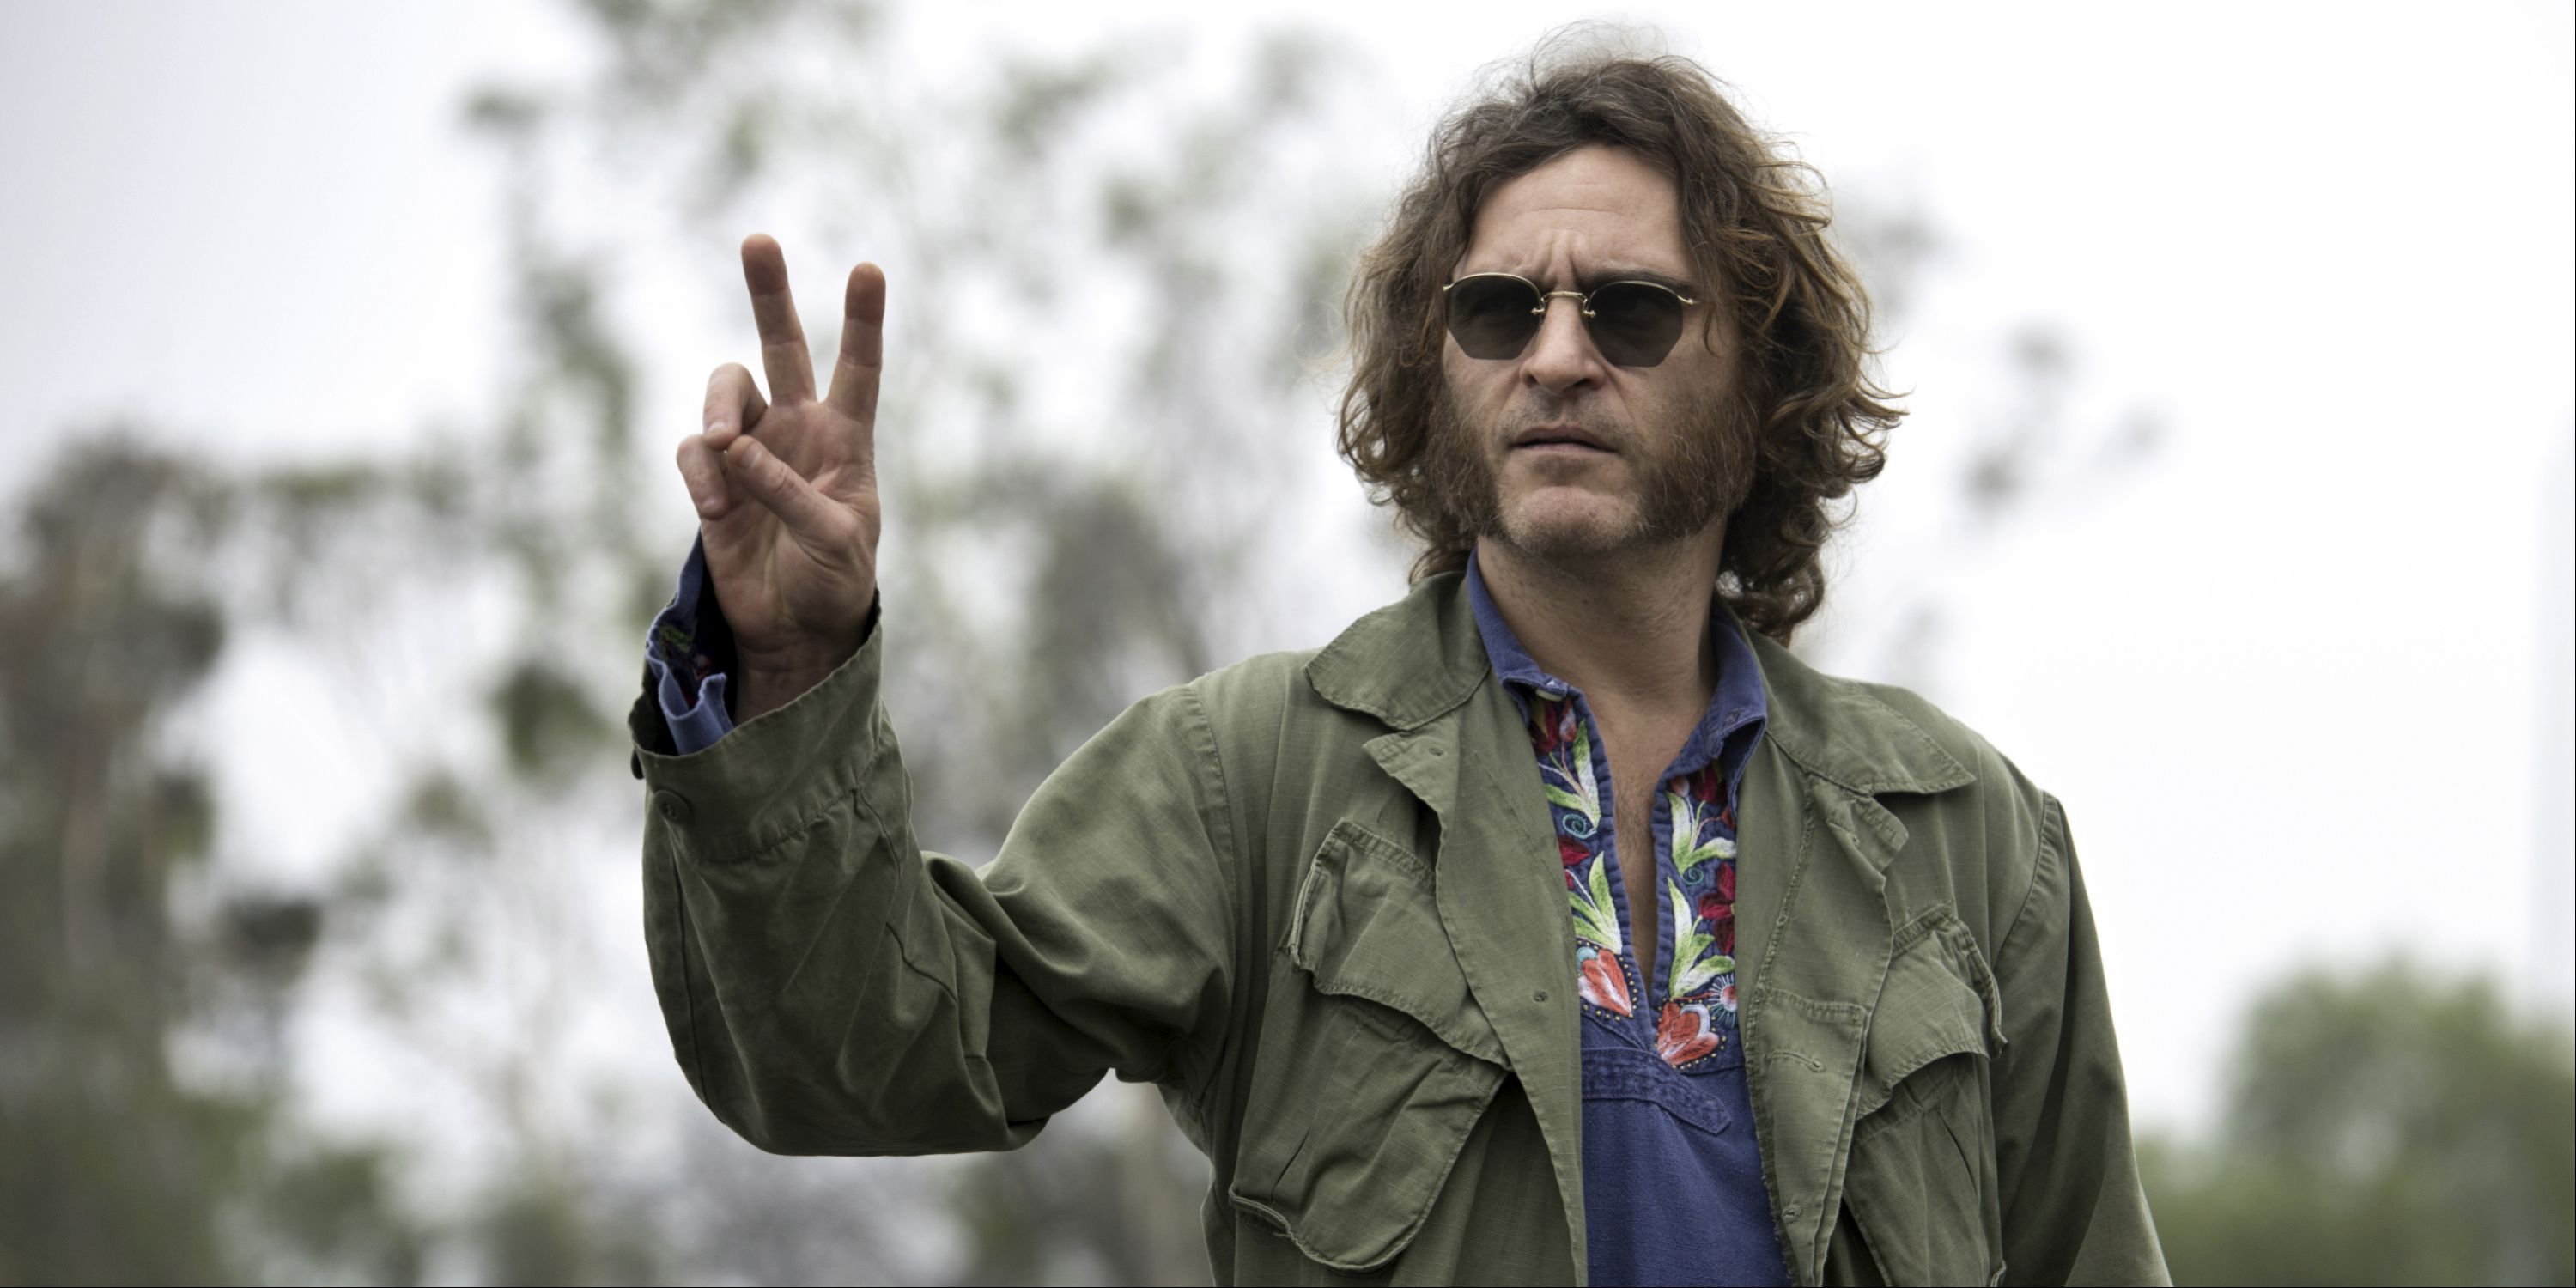 Joaquin Phoenix as Doc Portello giving a peace sign in Inherent Vice